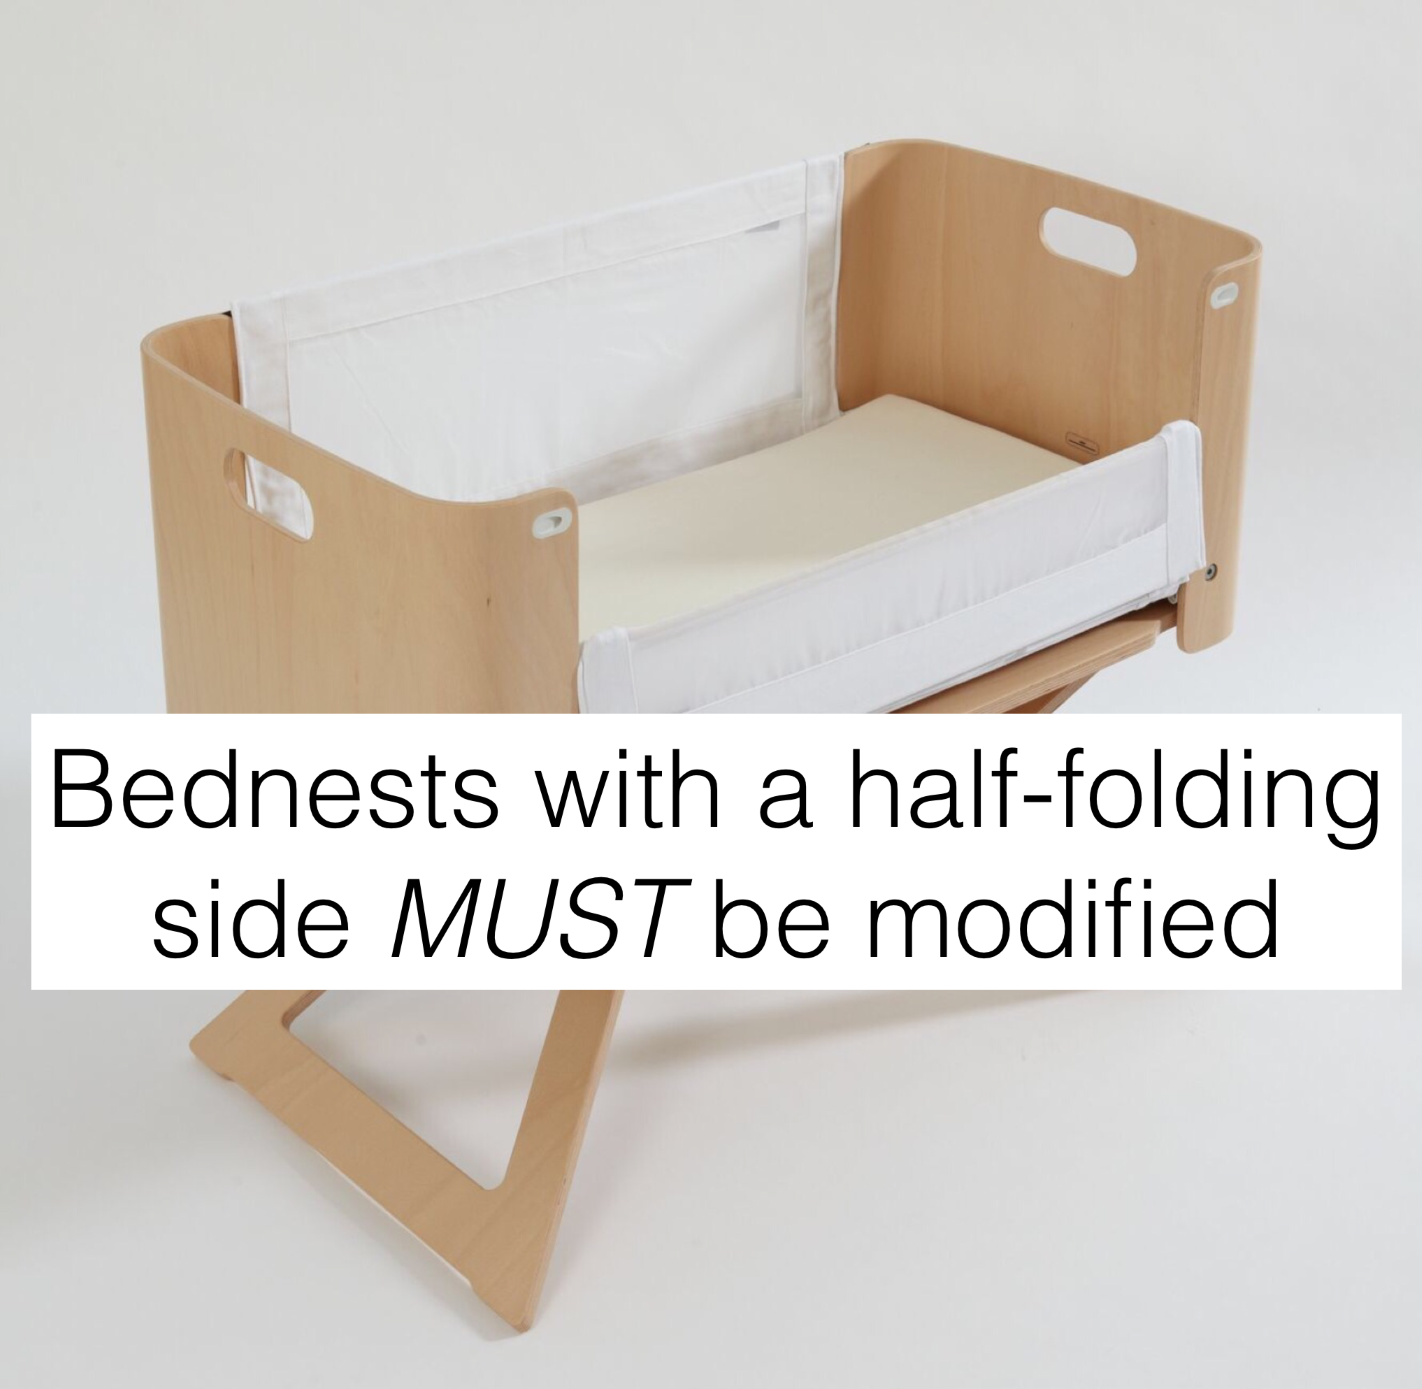 Bednest with half-folding side - requires modification